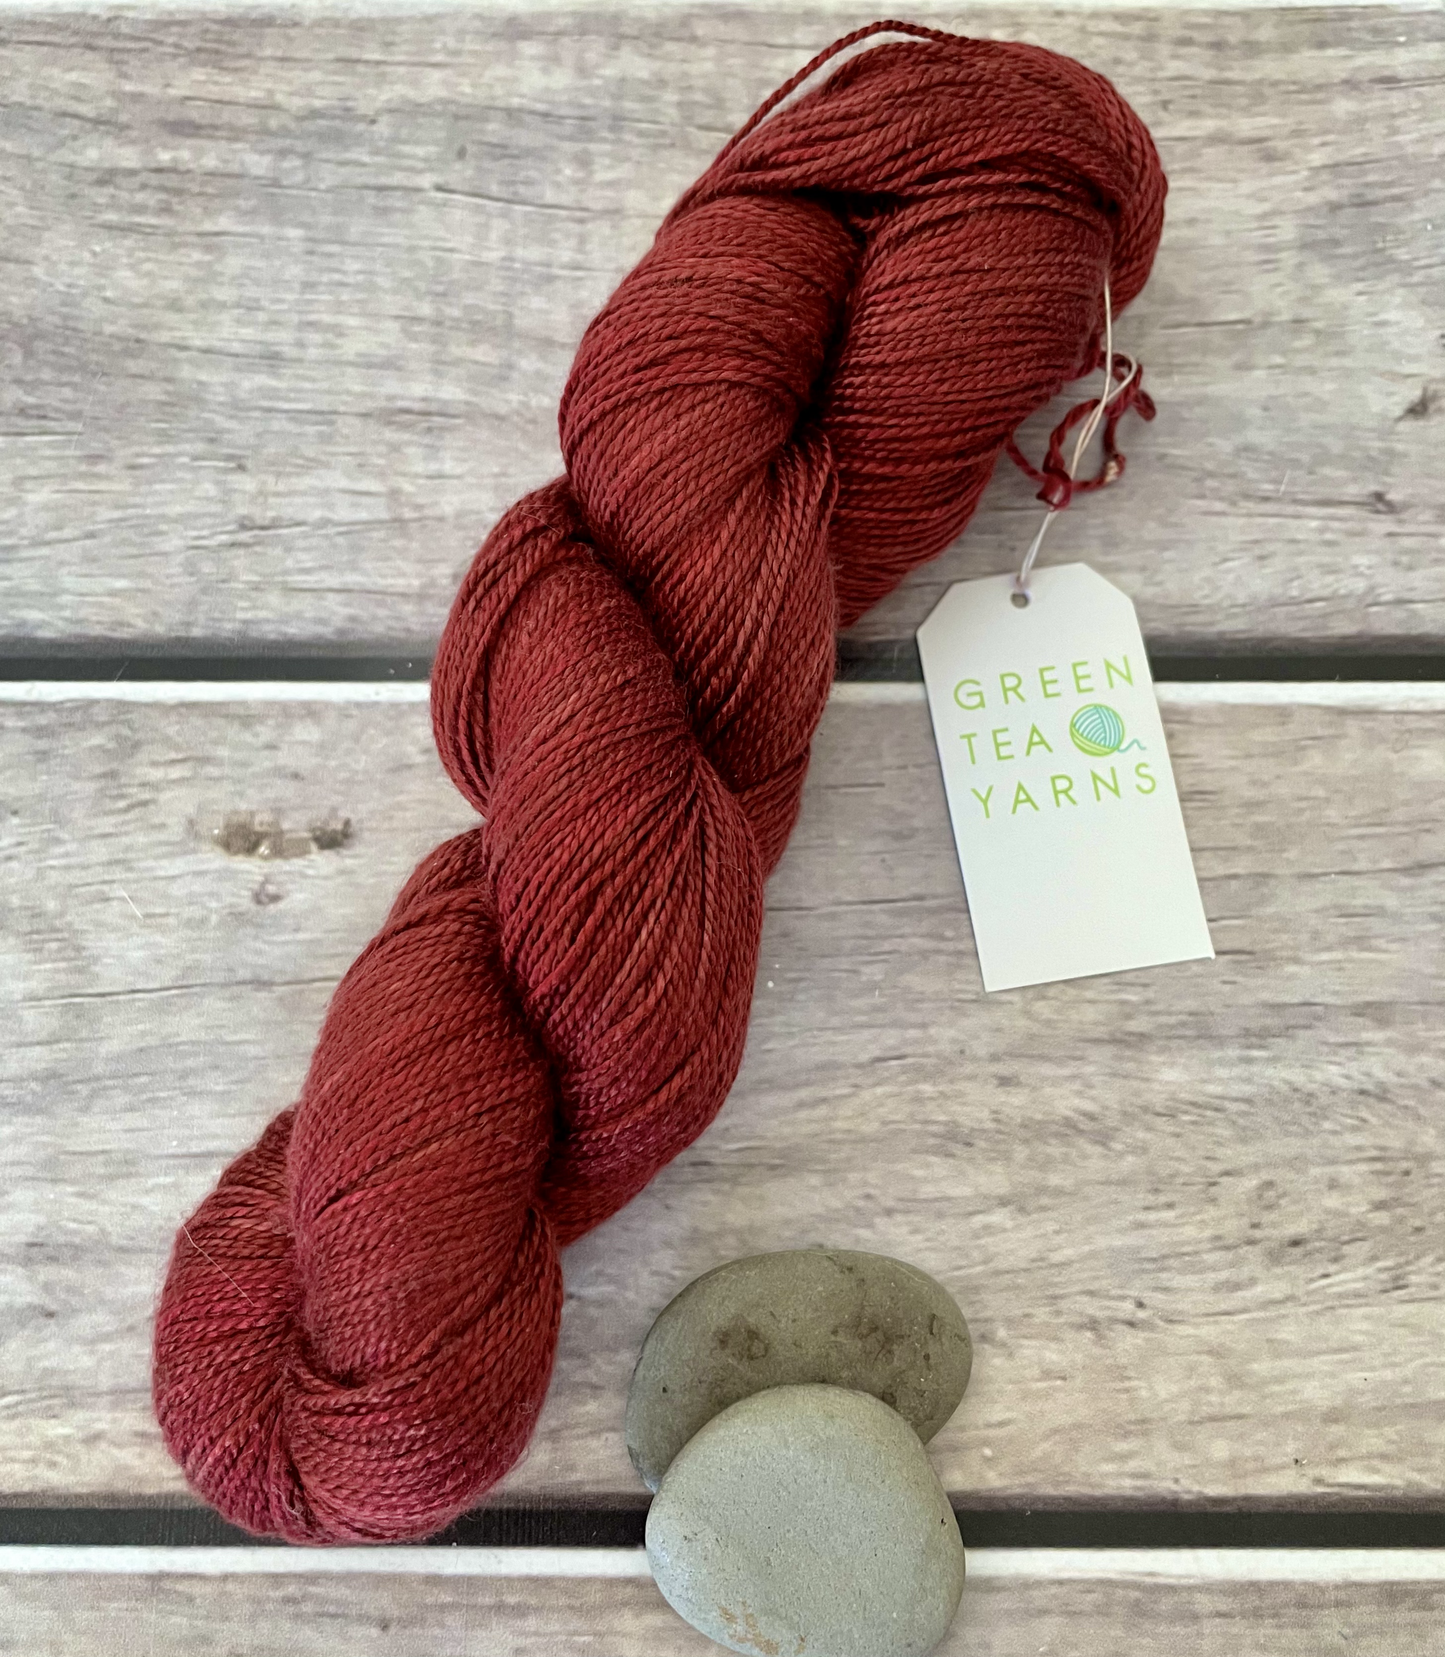 Dragonsblood ooak - 4 ply in Mulberry silk - Ginseng f